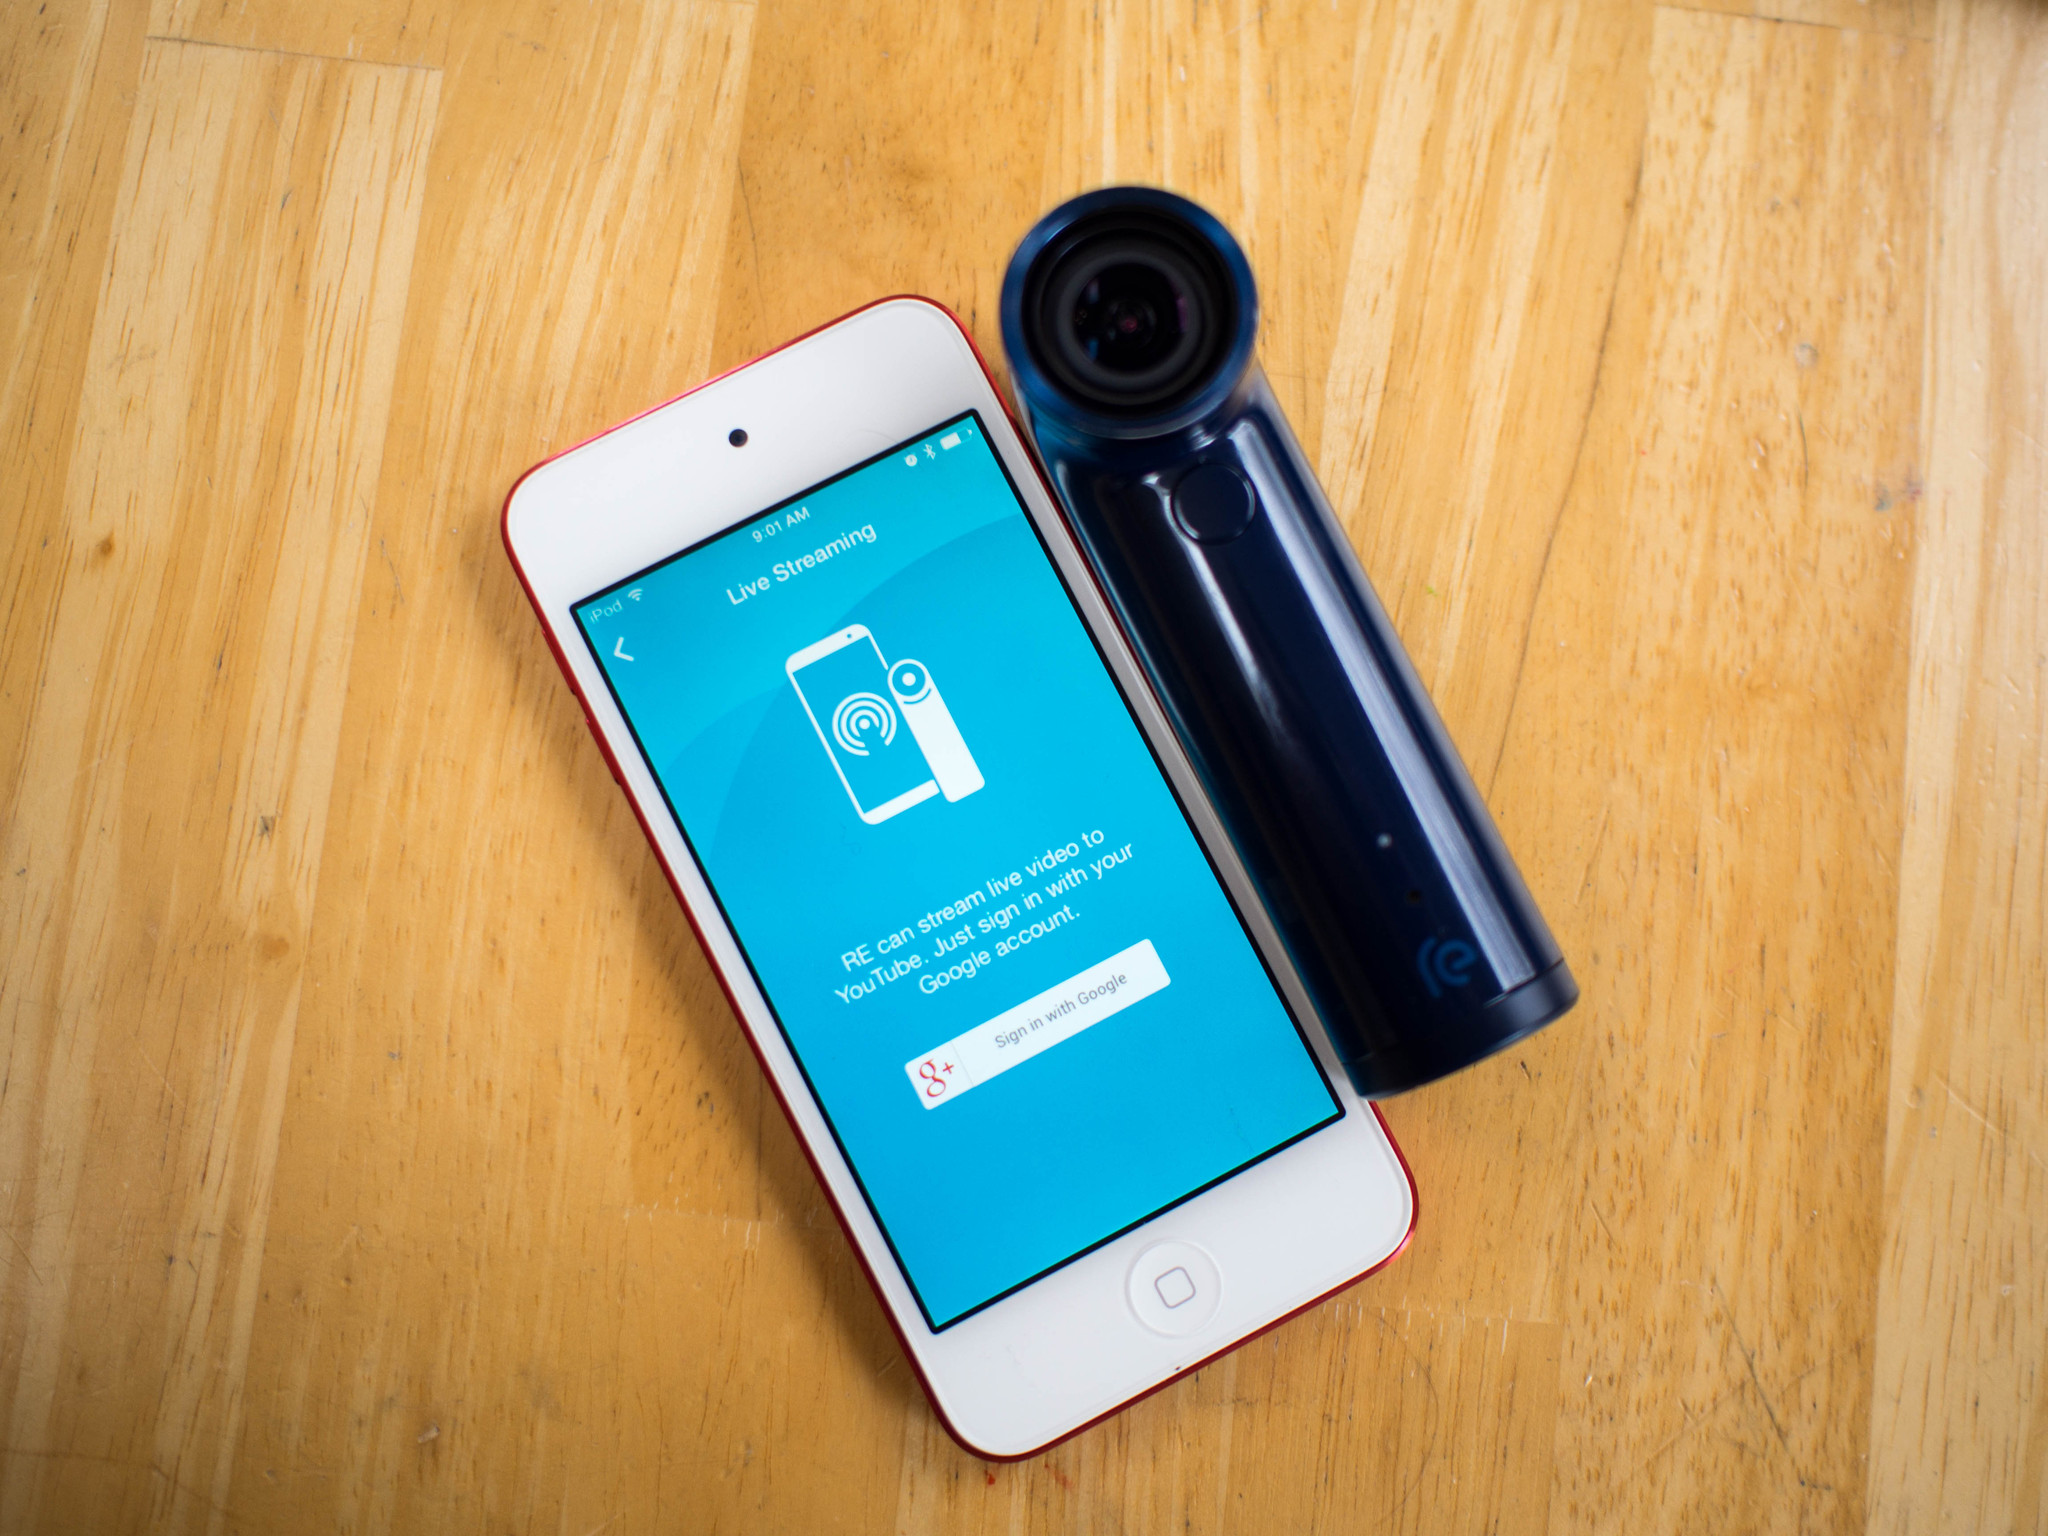 HTC RE camera app for iPhone now lets you stream live to YouTube